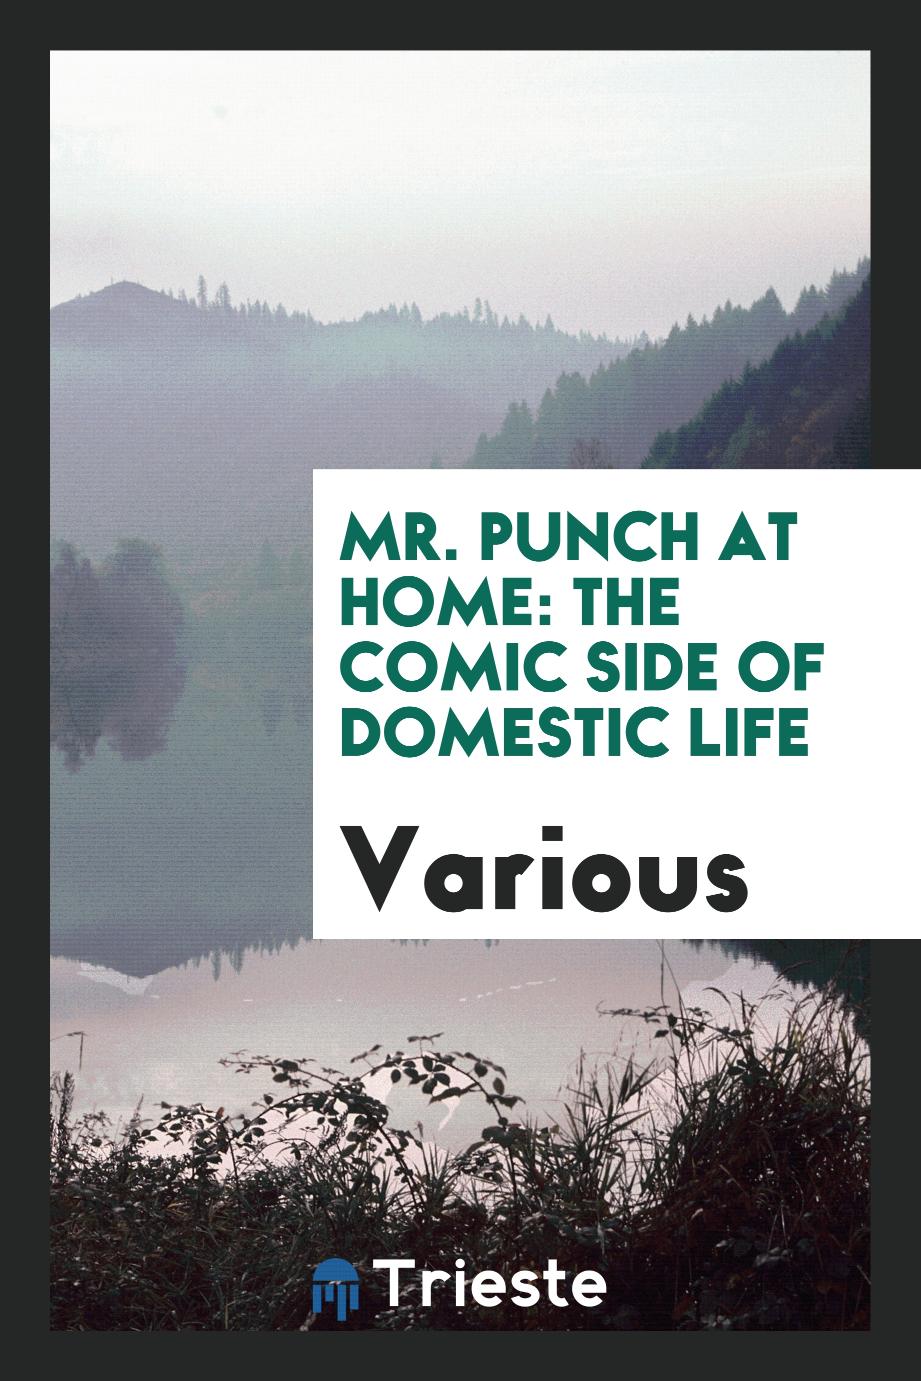 Mr. Punch at home: the comic side of domestic life